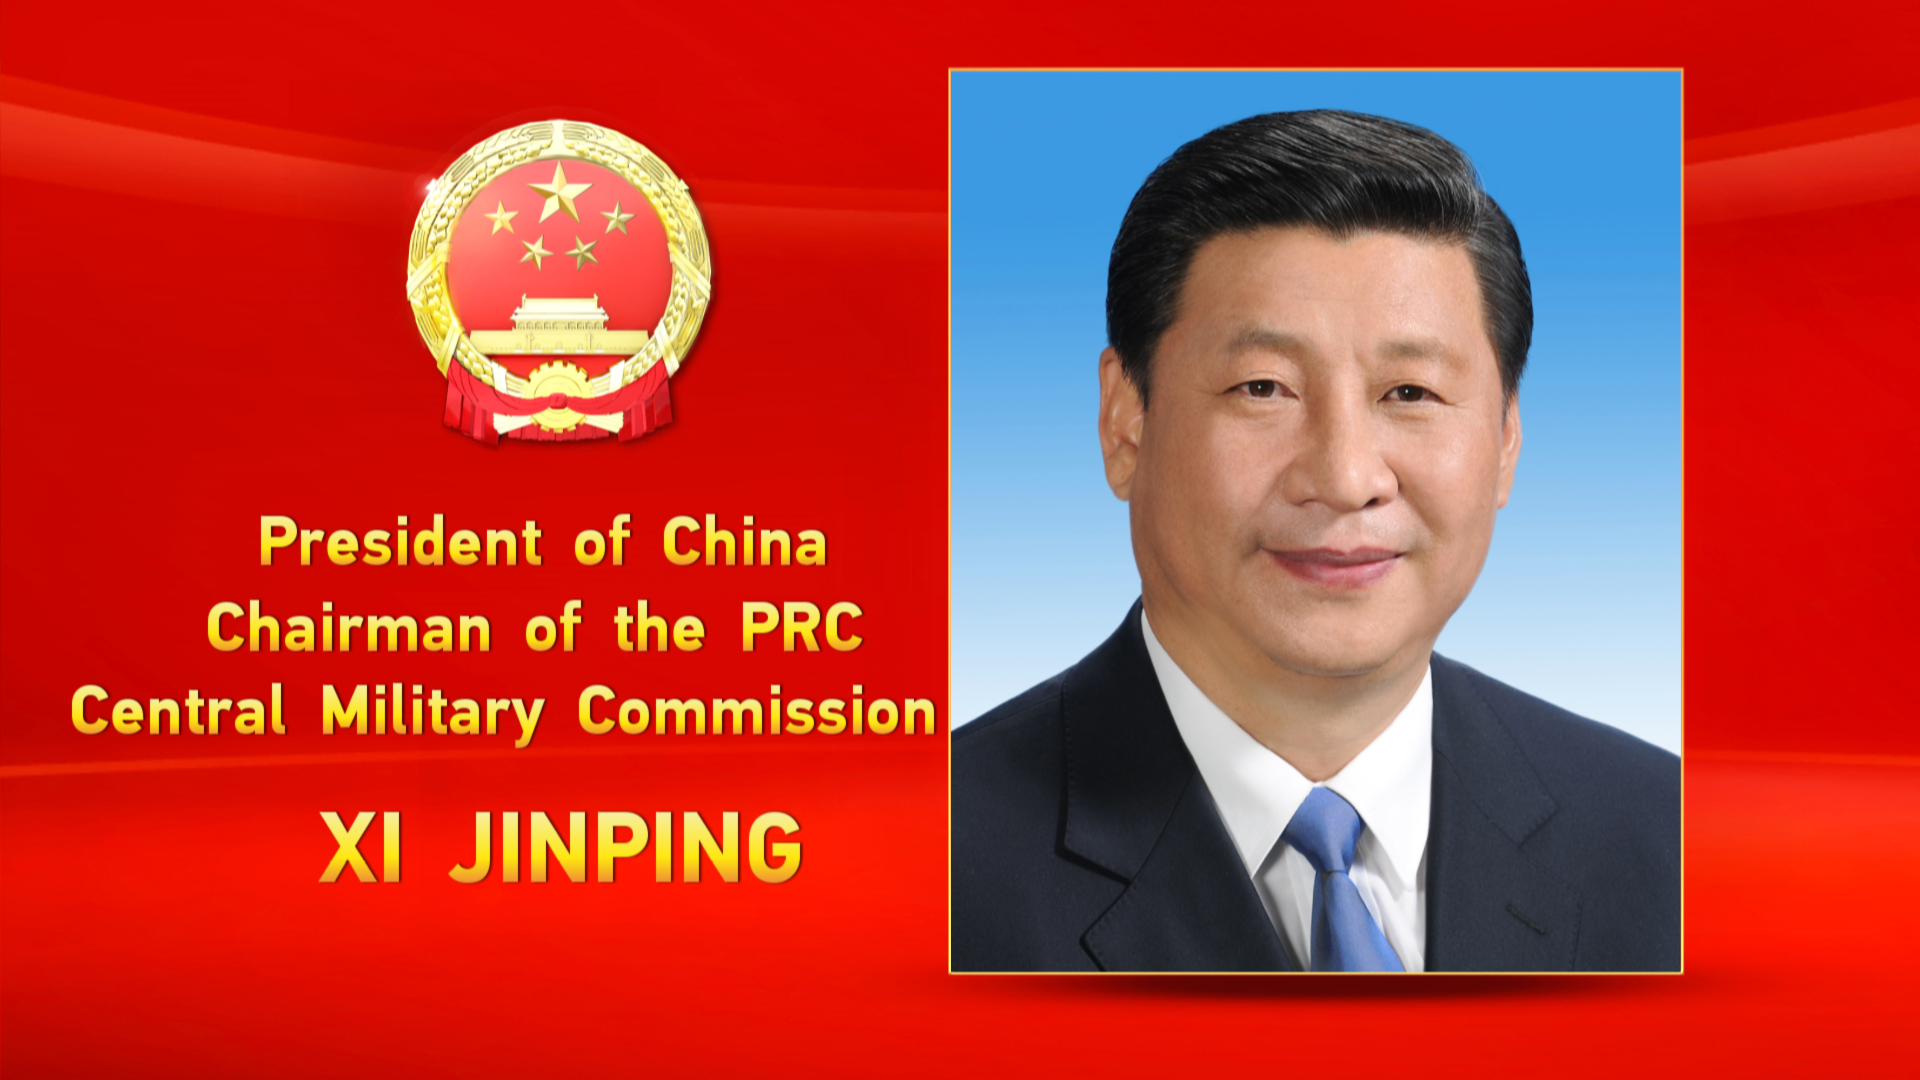 Brief introduction of Xi Jinping – Chinese president, PRC CMC chairman